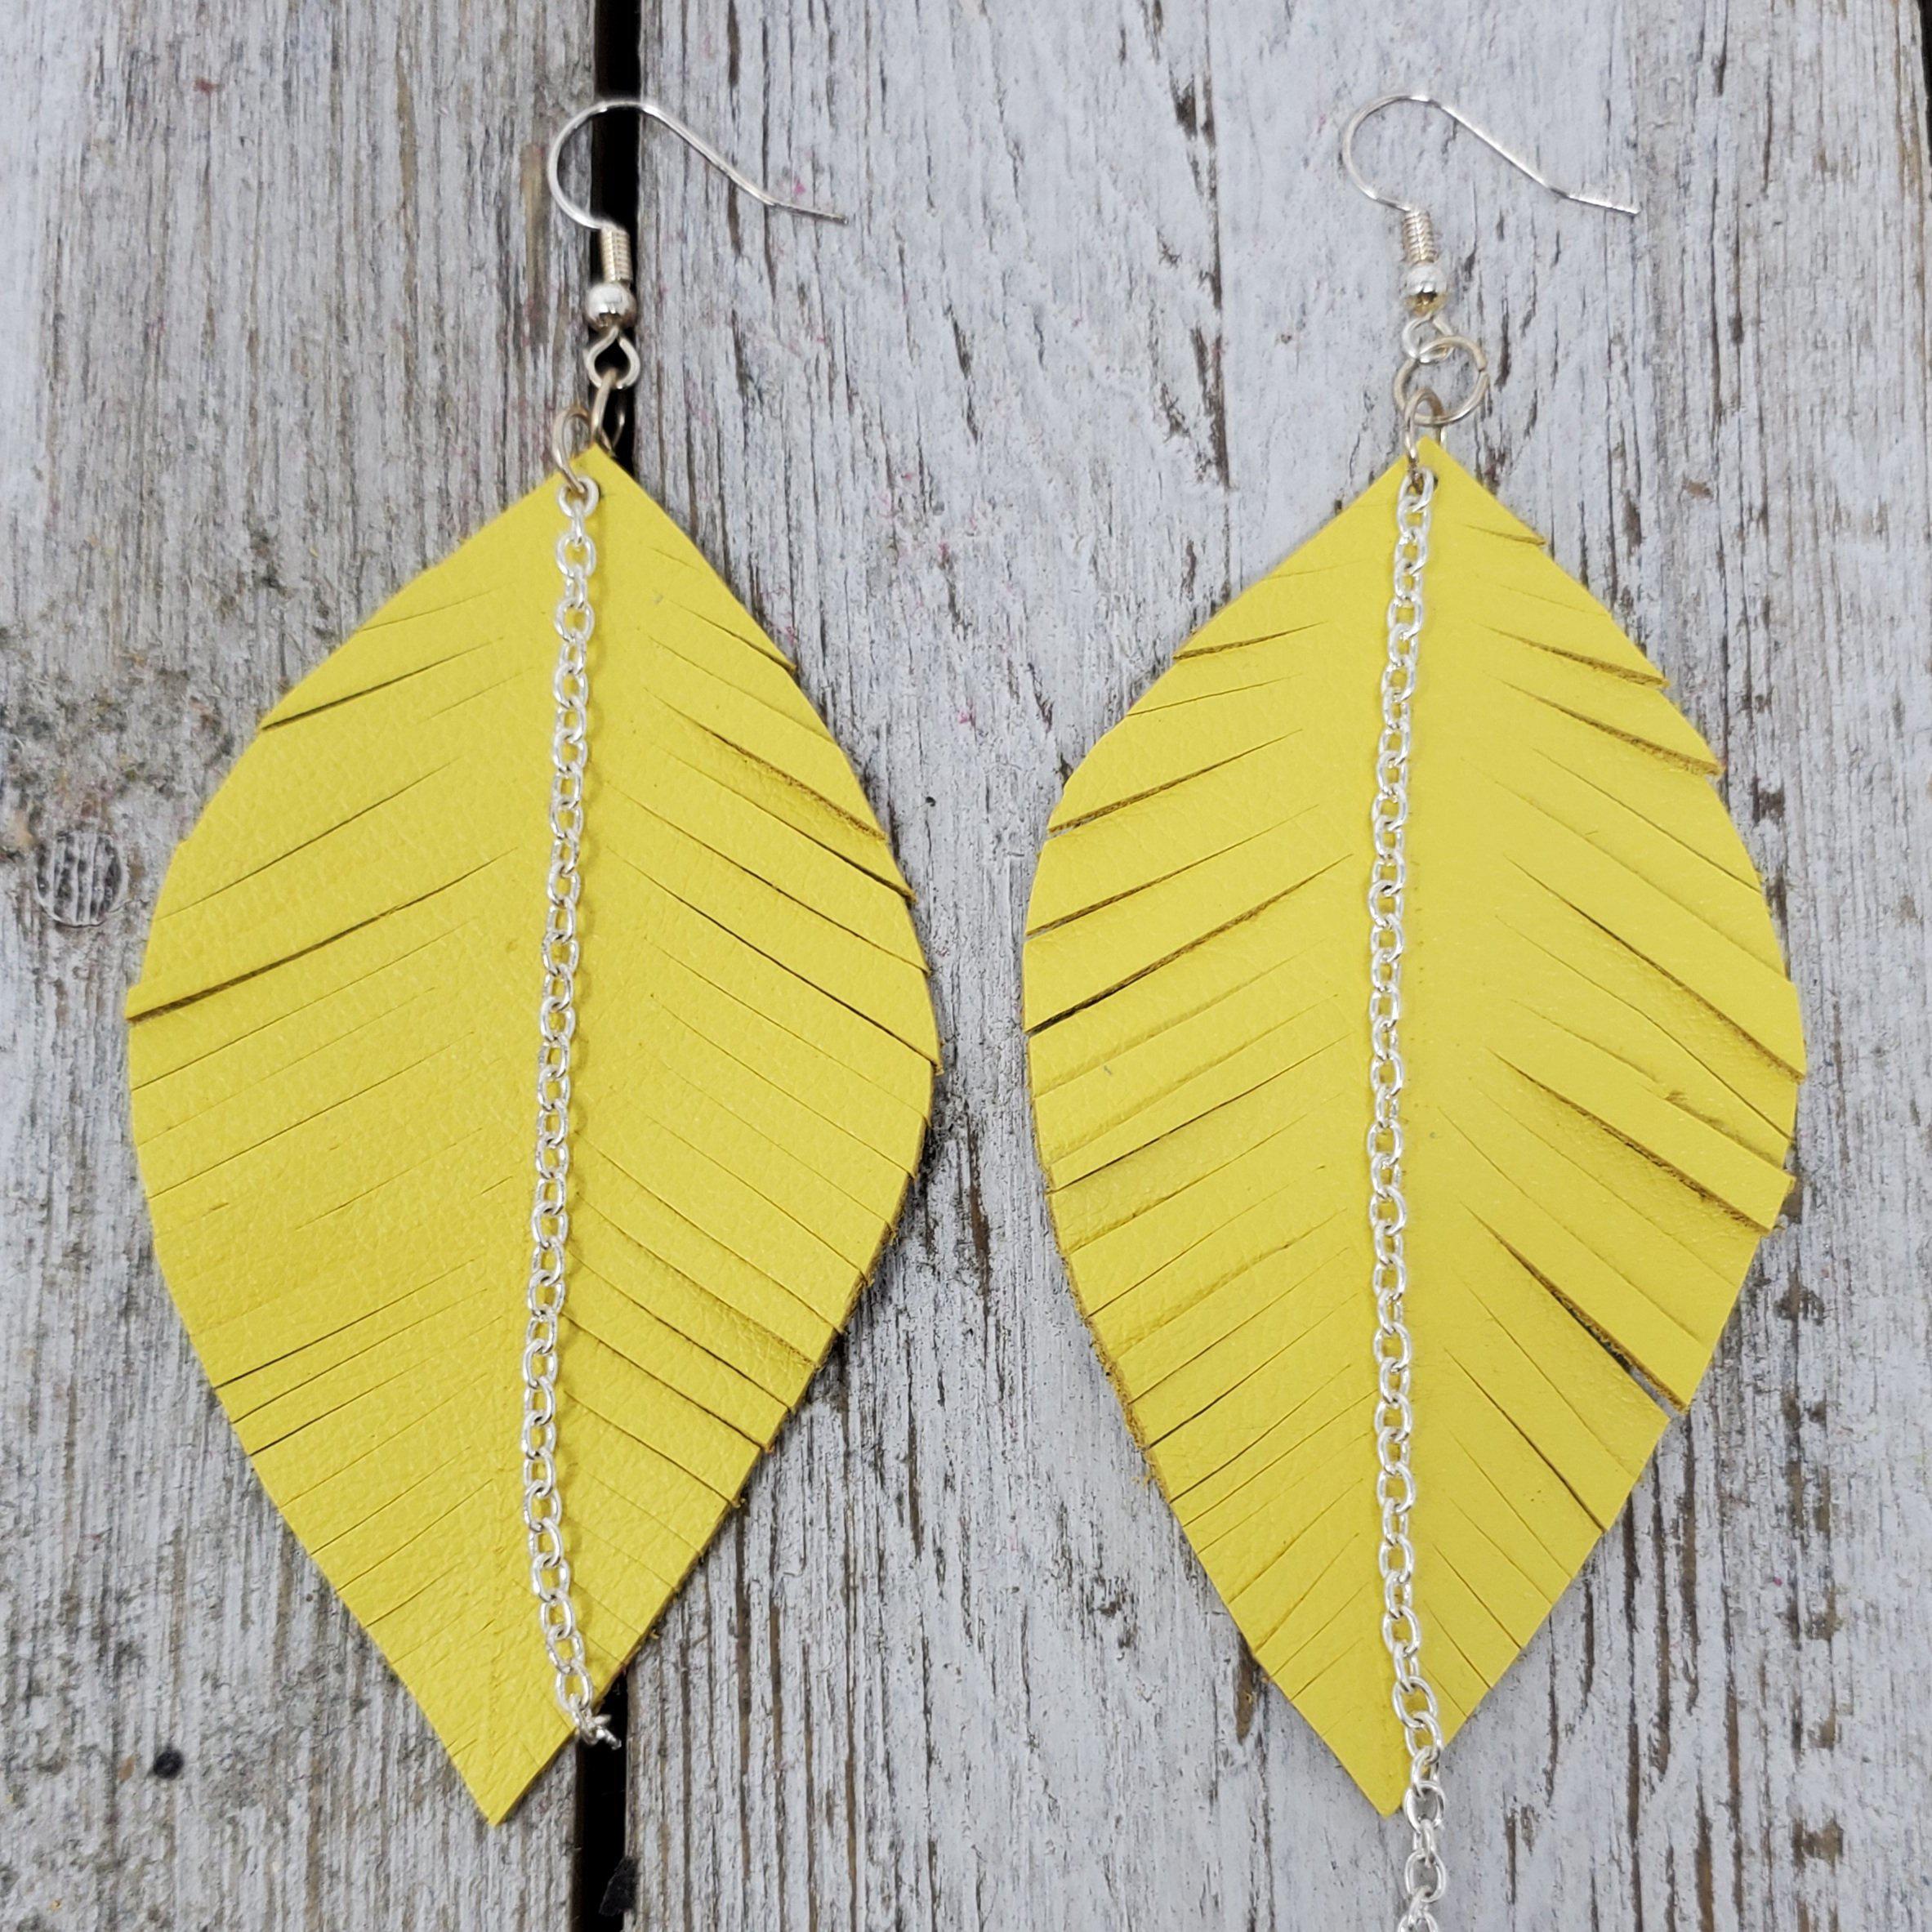 Leather Leaf Earrings : 11 Steps (with Pictures) - Instructables